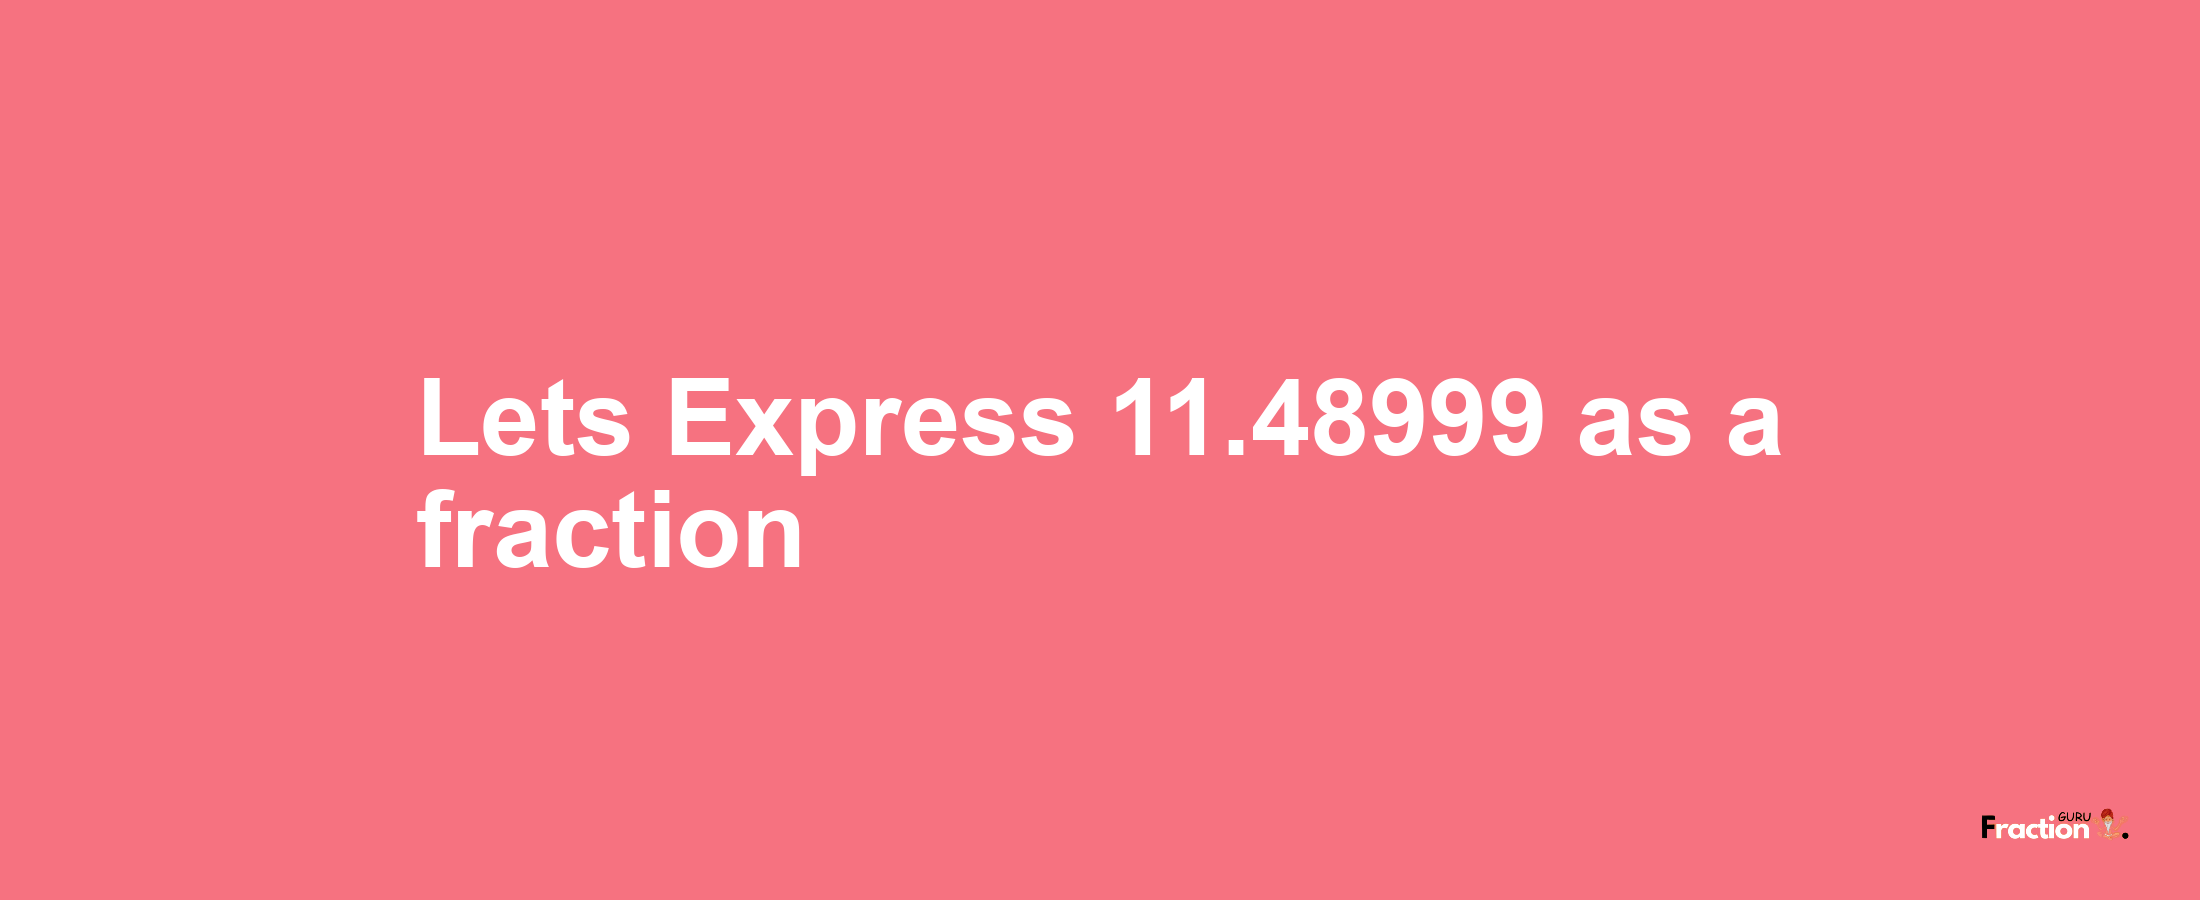 Lets Express 11.48999 as afraction